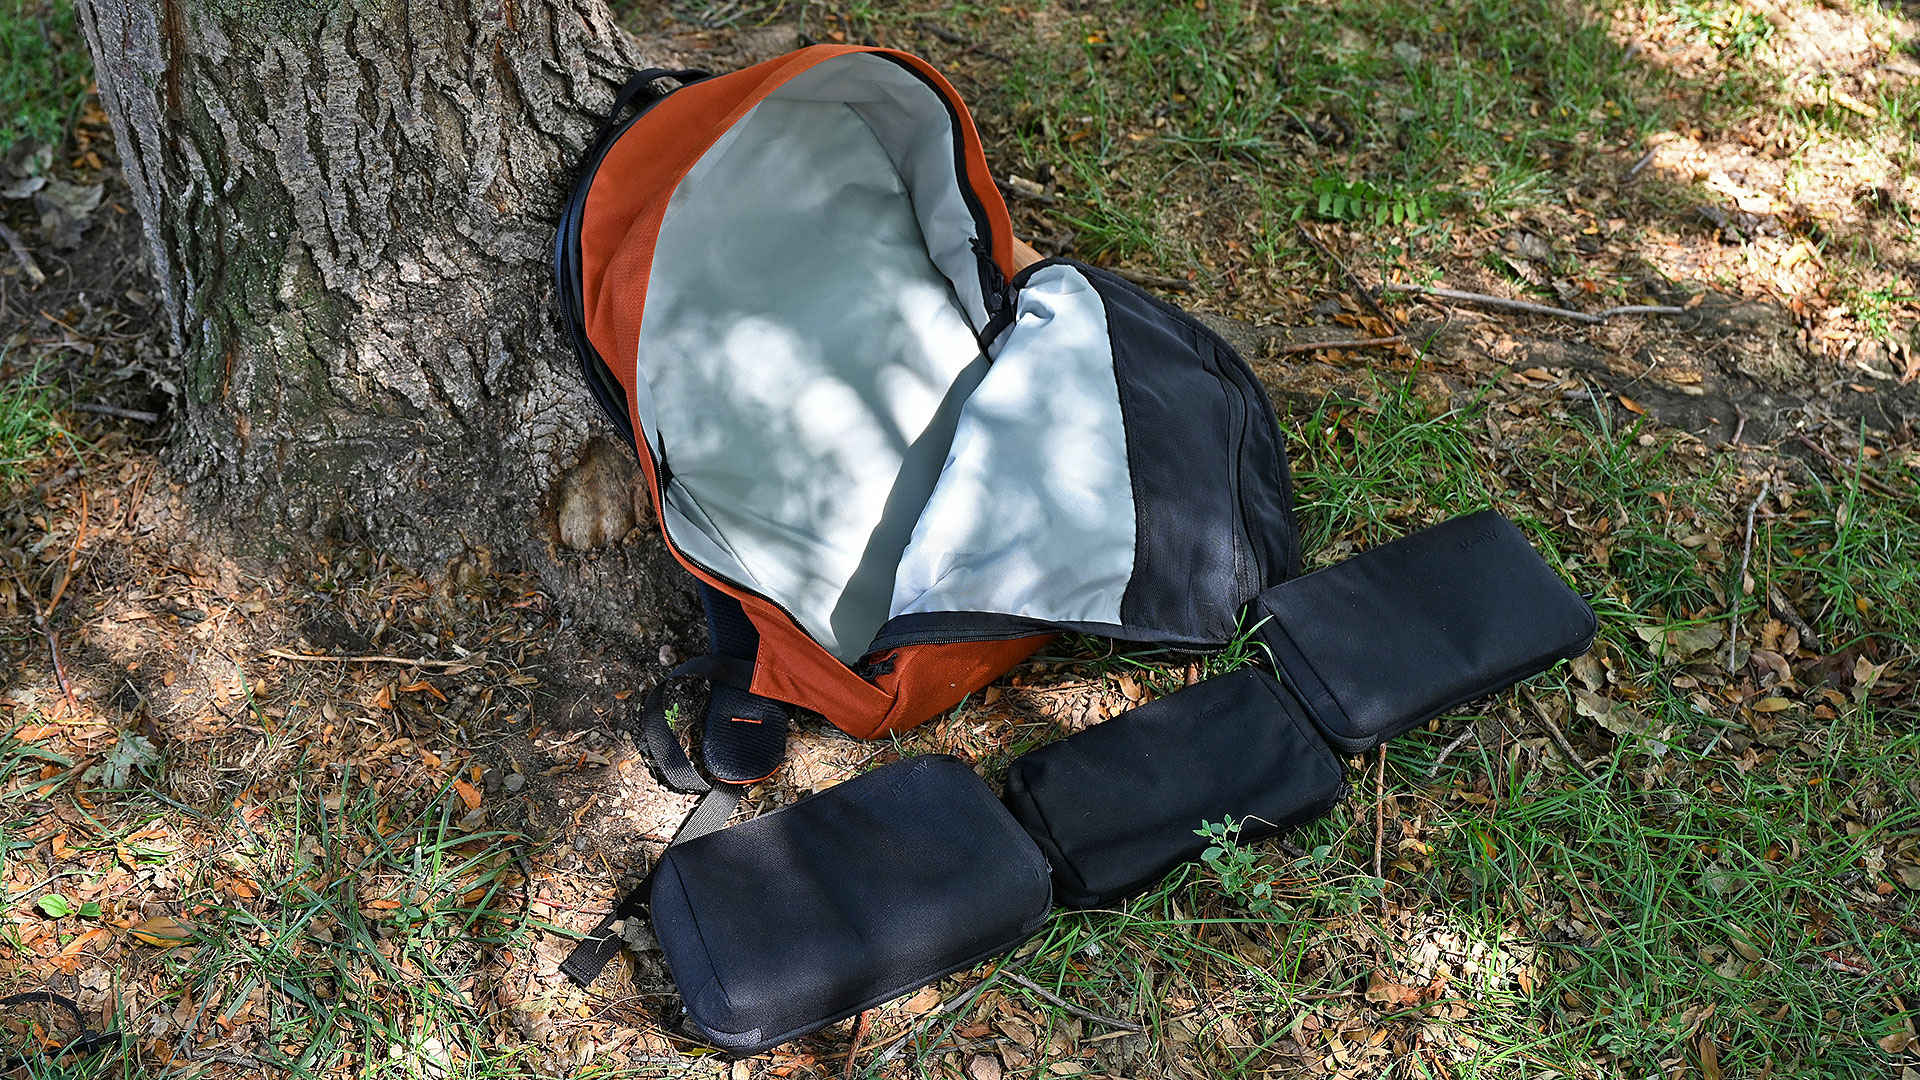 Using smaller pouches and inserts make it easy for the MTW Backpack to accommodate various loads, while also being able to quickly adjust any oddly shaped items you might need to carry.  (Photo: Sam Rutherford/Gizmodo)